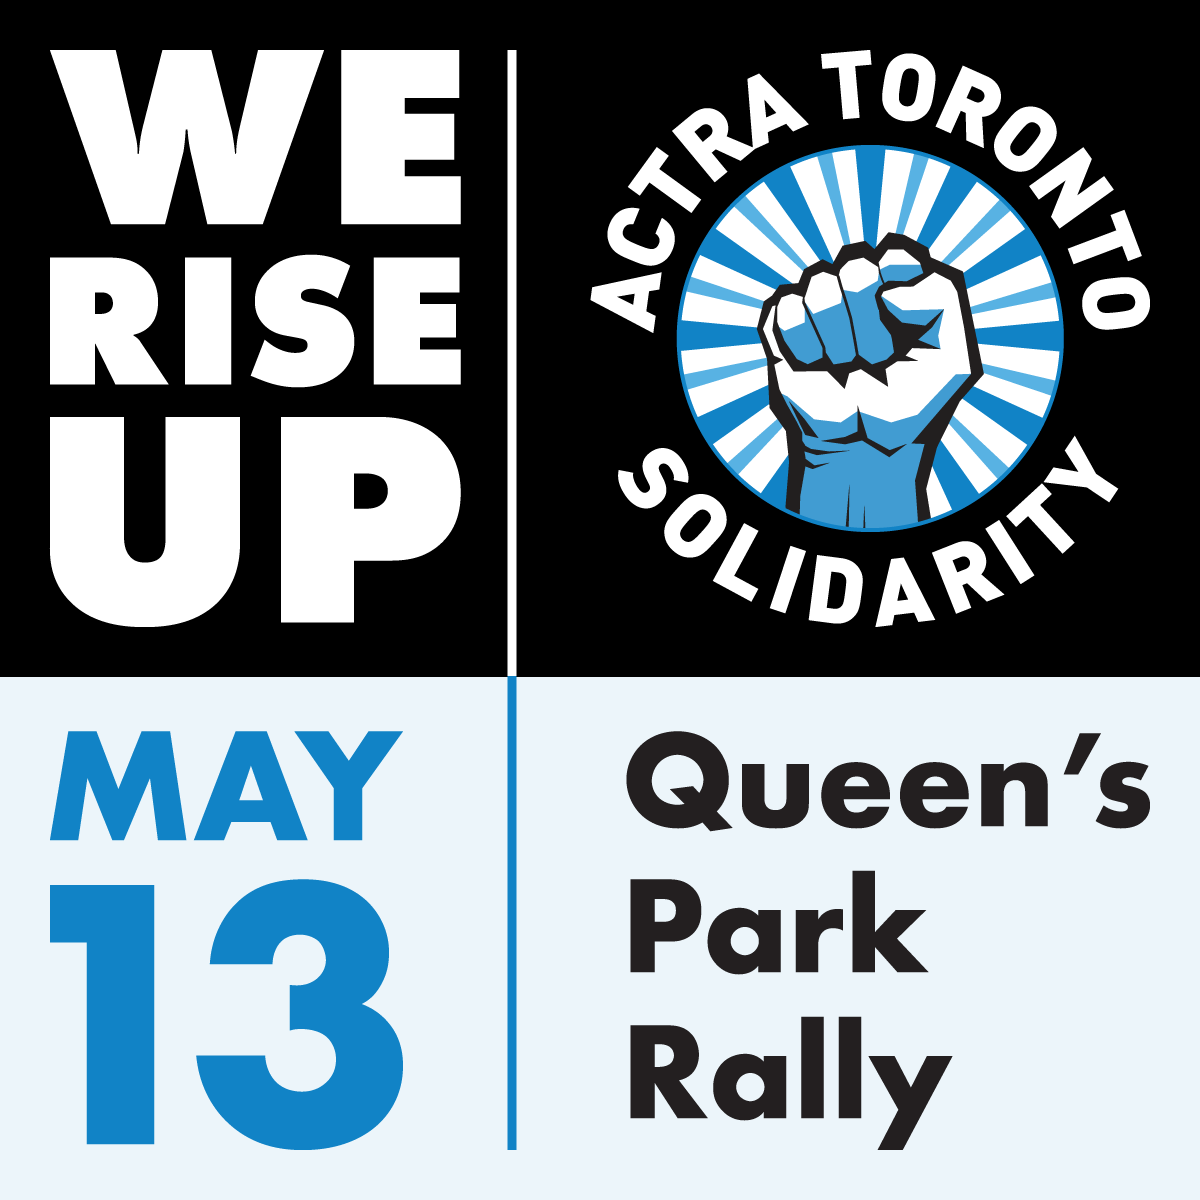 April 26th marked two years since @ICACanada locked out @ACTRAToronto performers. Join ACTRA Toronto to tell @fordnation to stop working ICA agencies until they come back to the table! ⏰ Mon May 13 at 12PM 📍Queen's Park Sign the petition & RSVP ⤵️ actratoronto.com/we-rise-up/